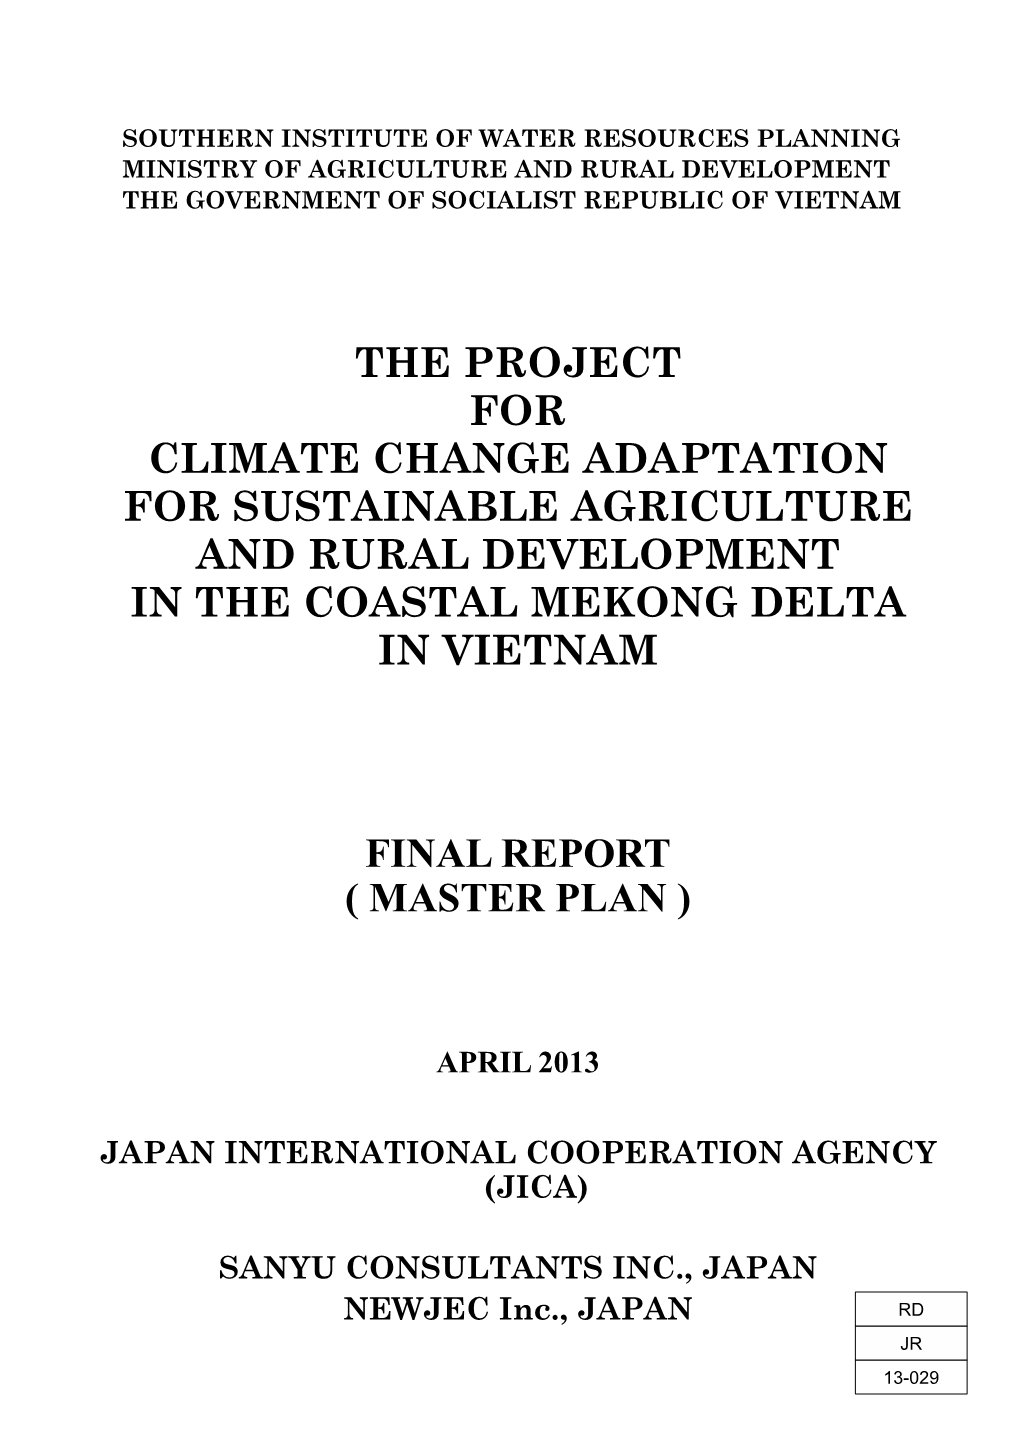 The Project for Climate Change Adaptation for Sustainable Agriculture and Rural Development in the Coastal Mekong Delta in Vietnam